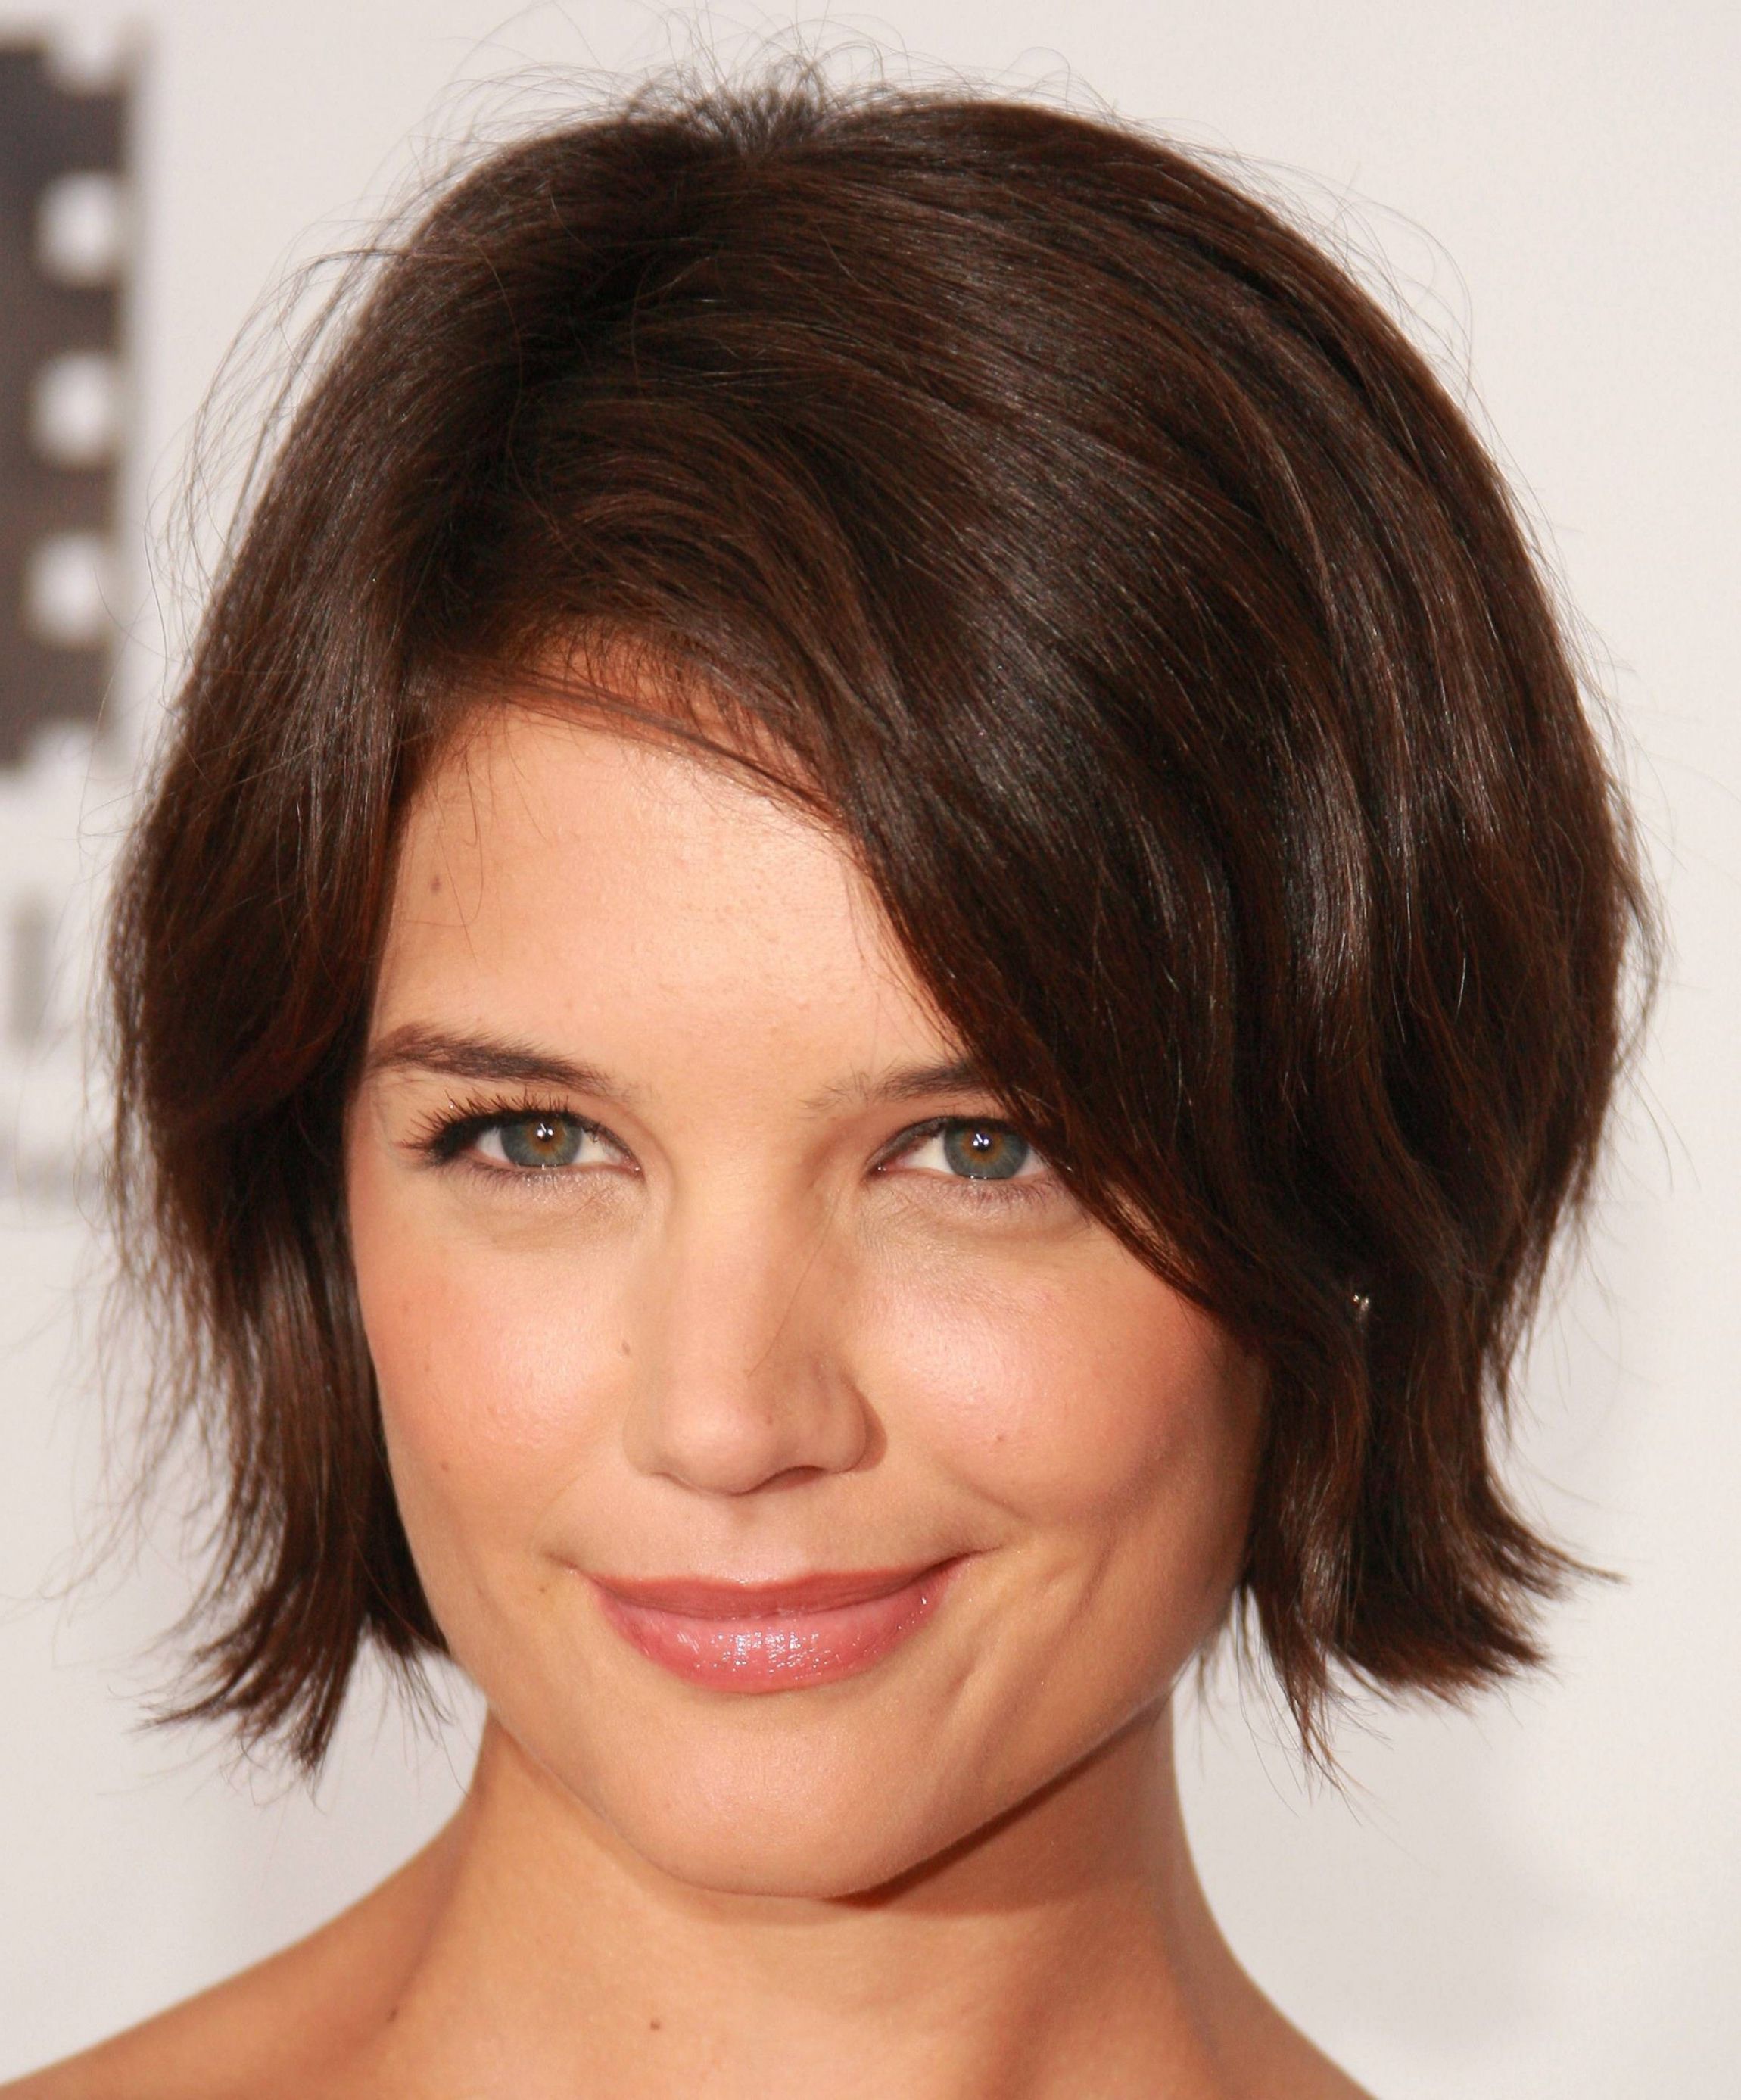 Best Short Hairstyles – Cute Hair Cut Guide For Round Face Shape In Short Haircuts For Fat Face (View 16 of 25)